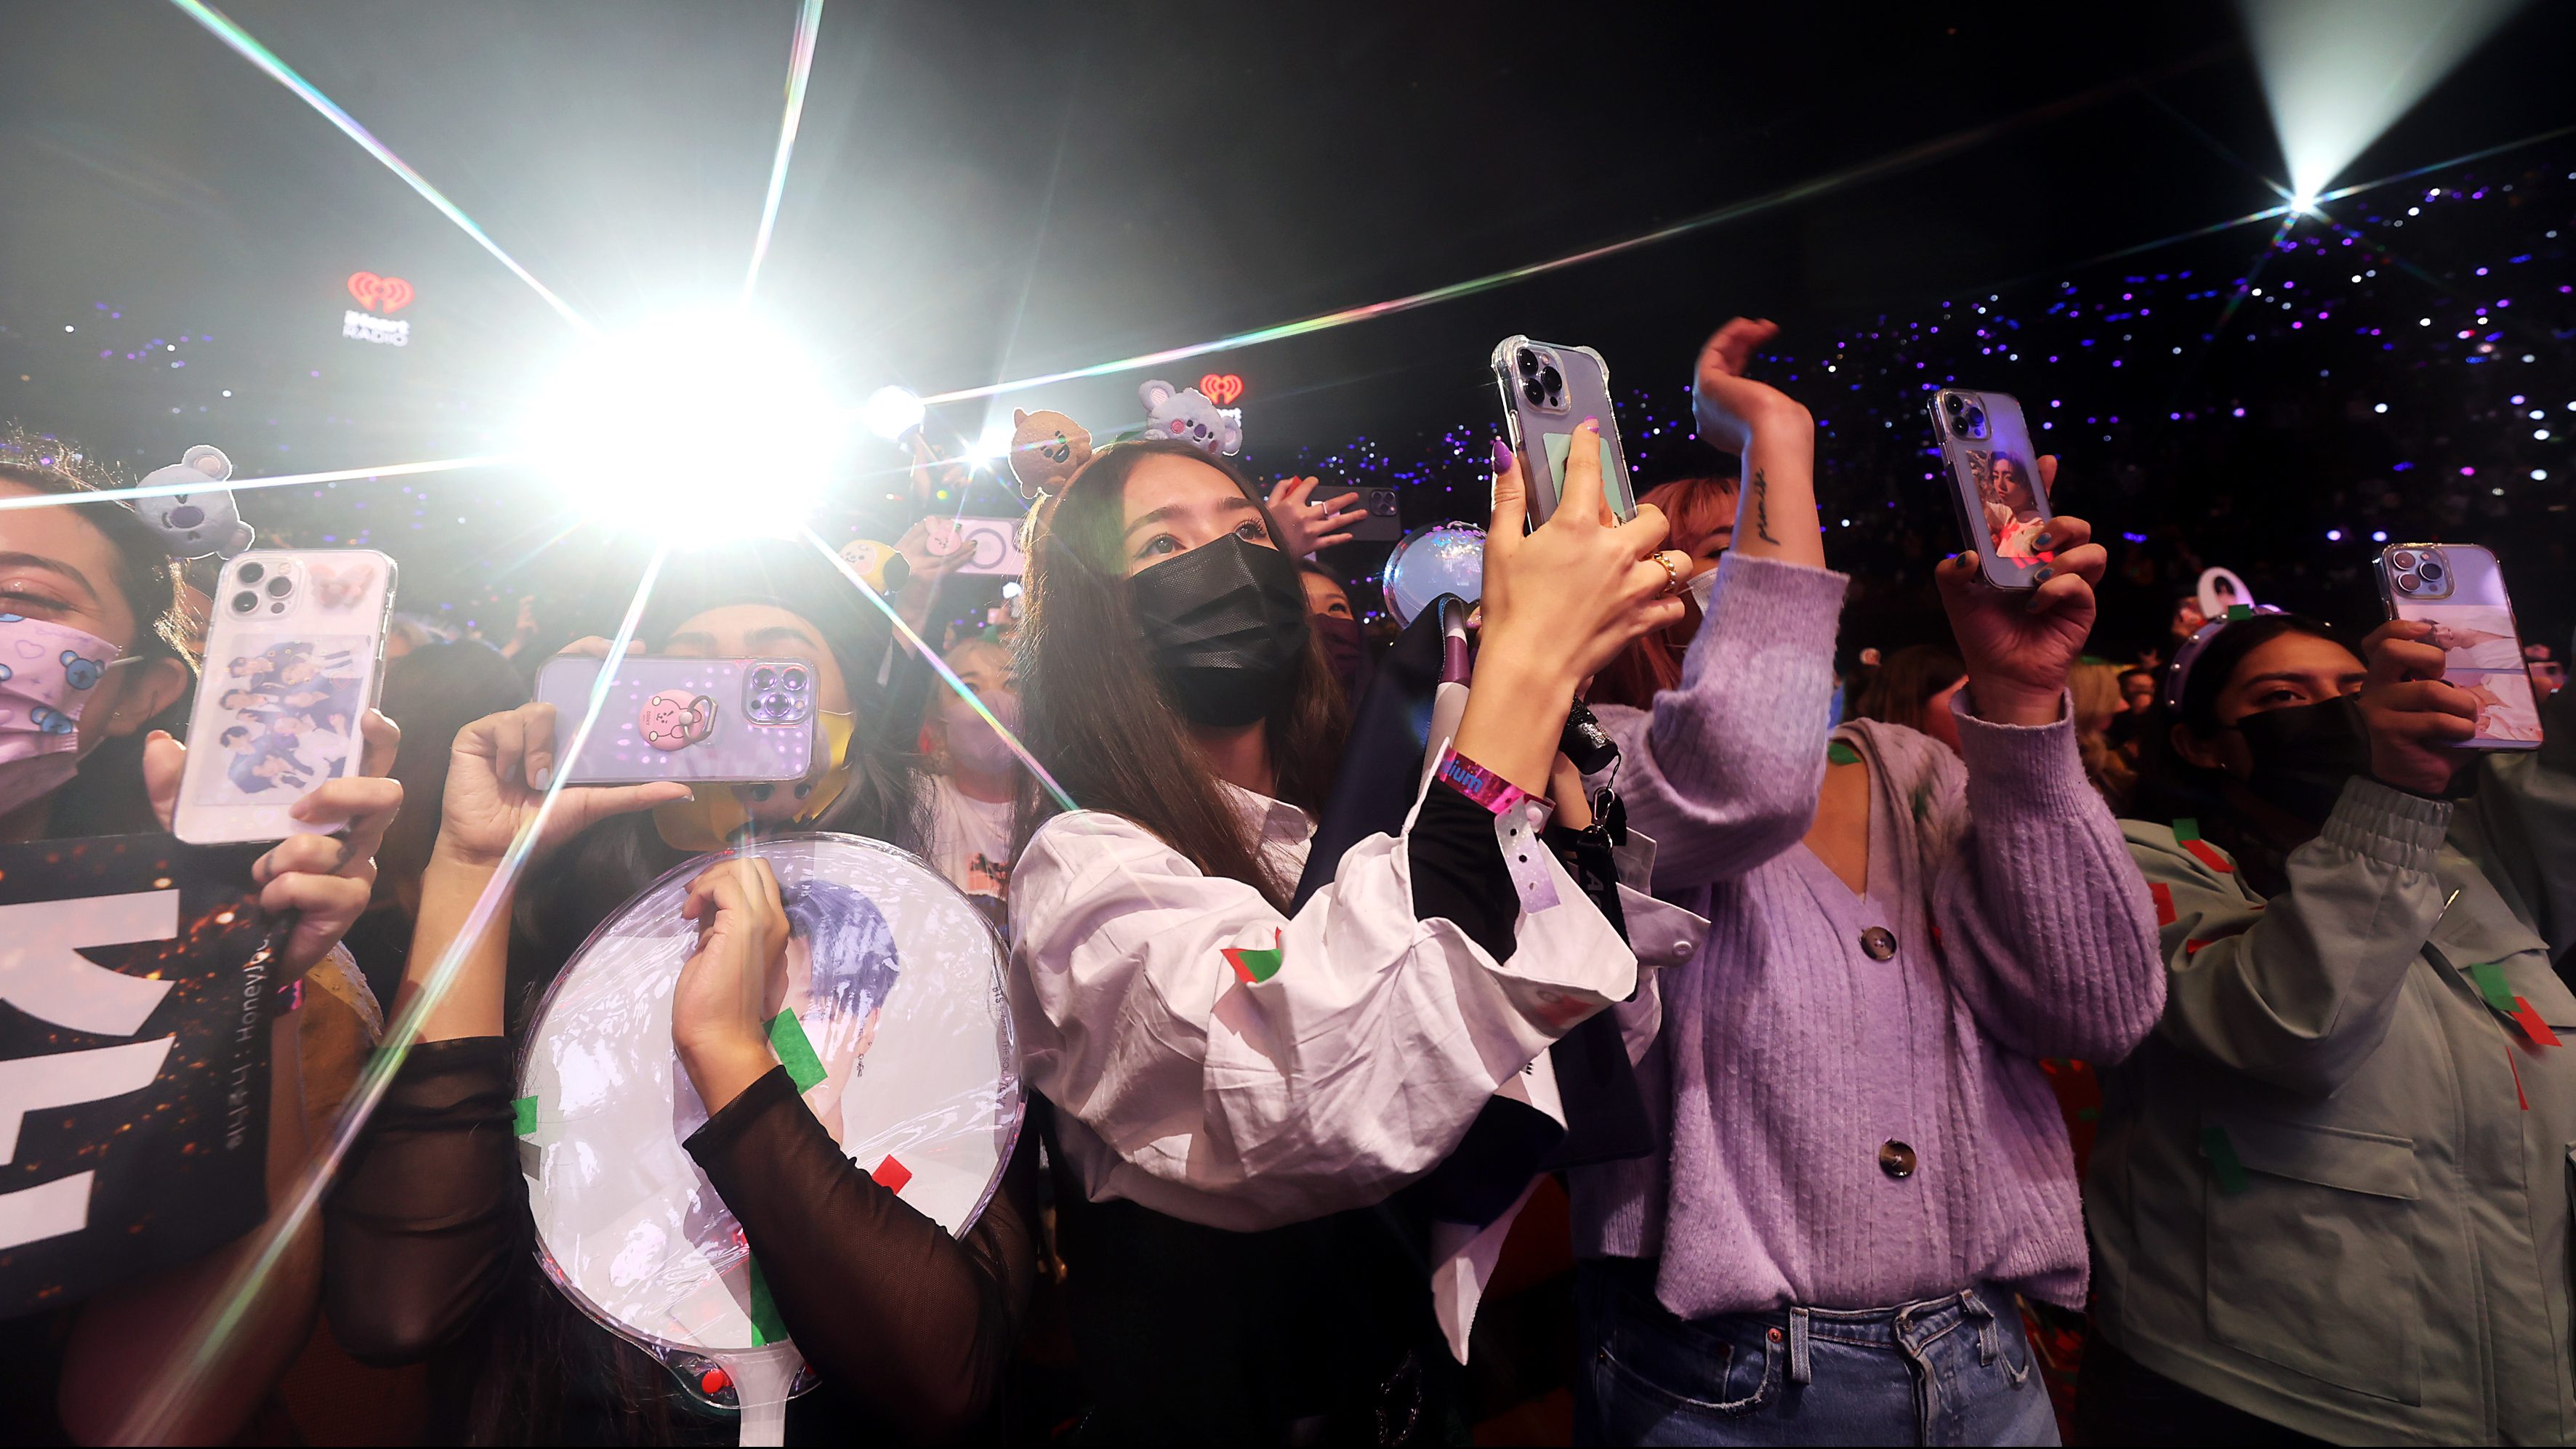 Concert-goers watch BTS perform onstage during iHeartRadio 102.7 KIIS FM's Jingle Ball 2021 presented by Capital One at The Forum on December 03, 2021 in Los Angeles, California.